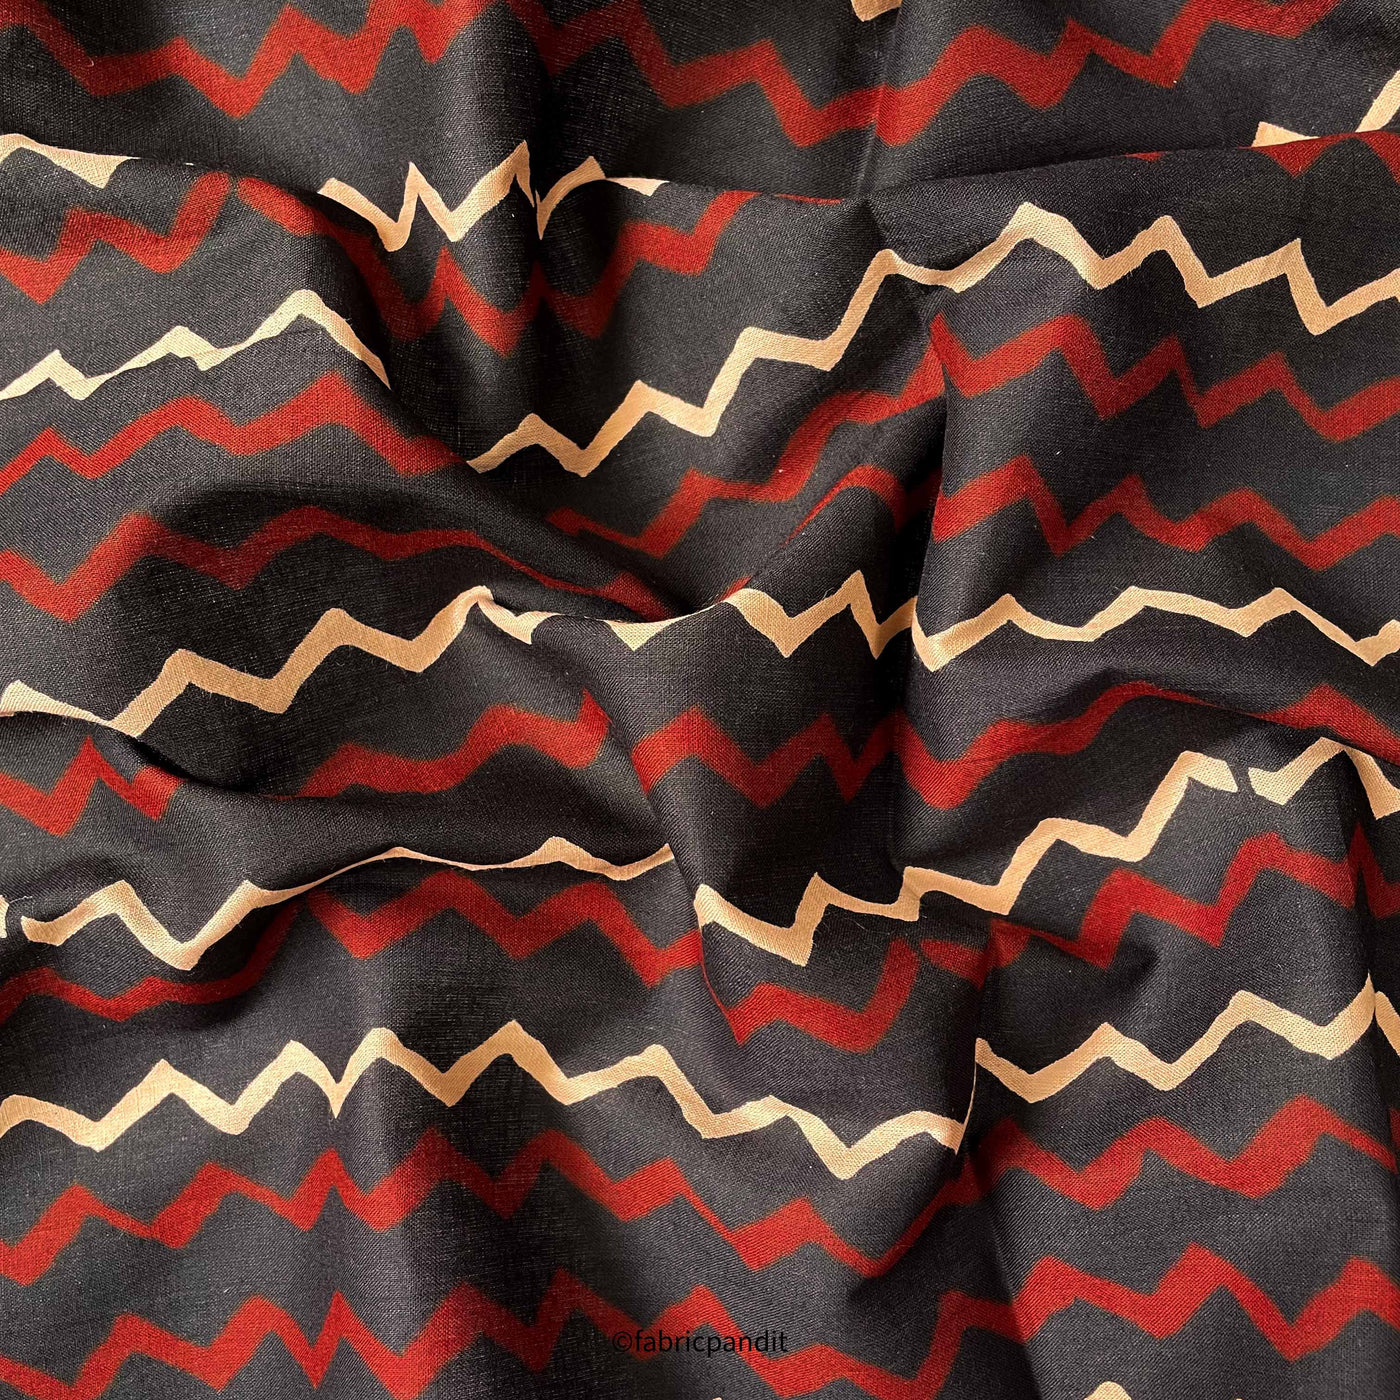 Hand Block Printed Cotton Fabric Cut Piece (CUT PIECE) Black & Red Zig- Zag Pattern Hand Block Printed Pure Cotton Fabric (Width 42 inches)